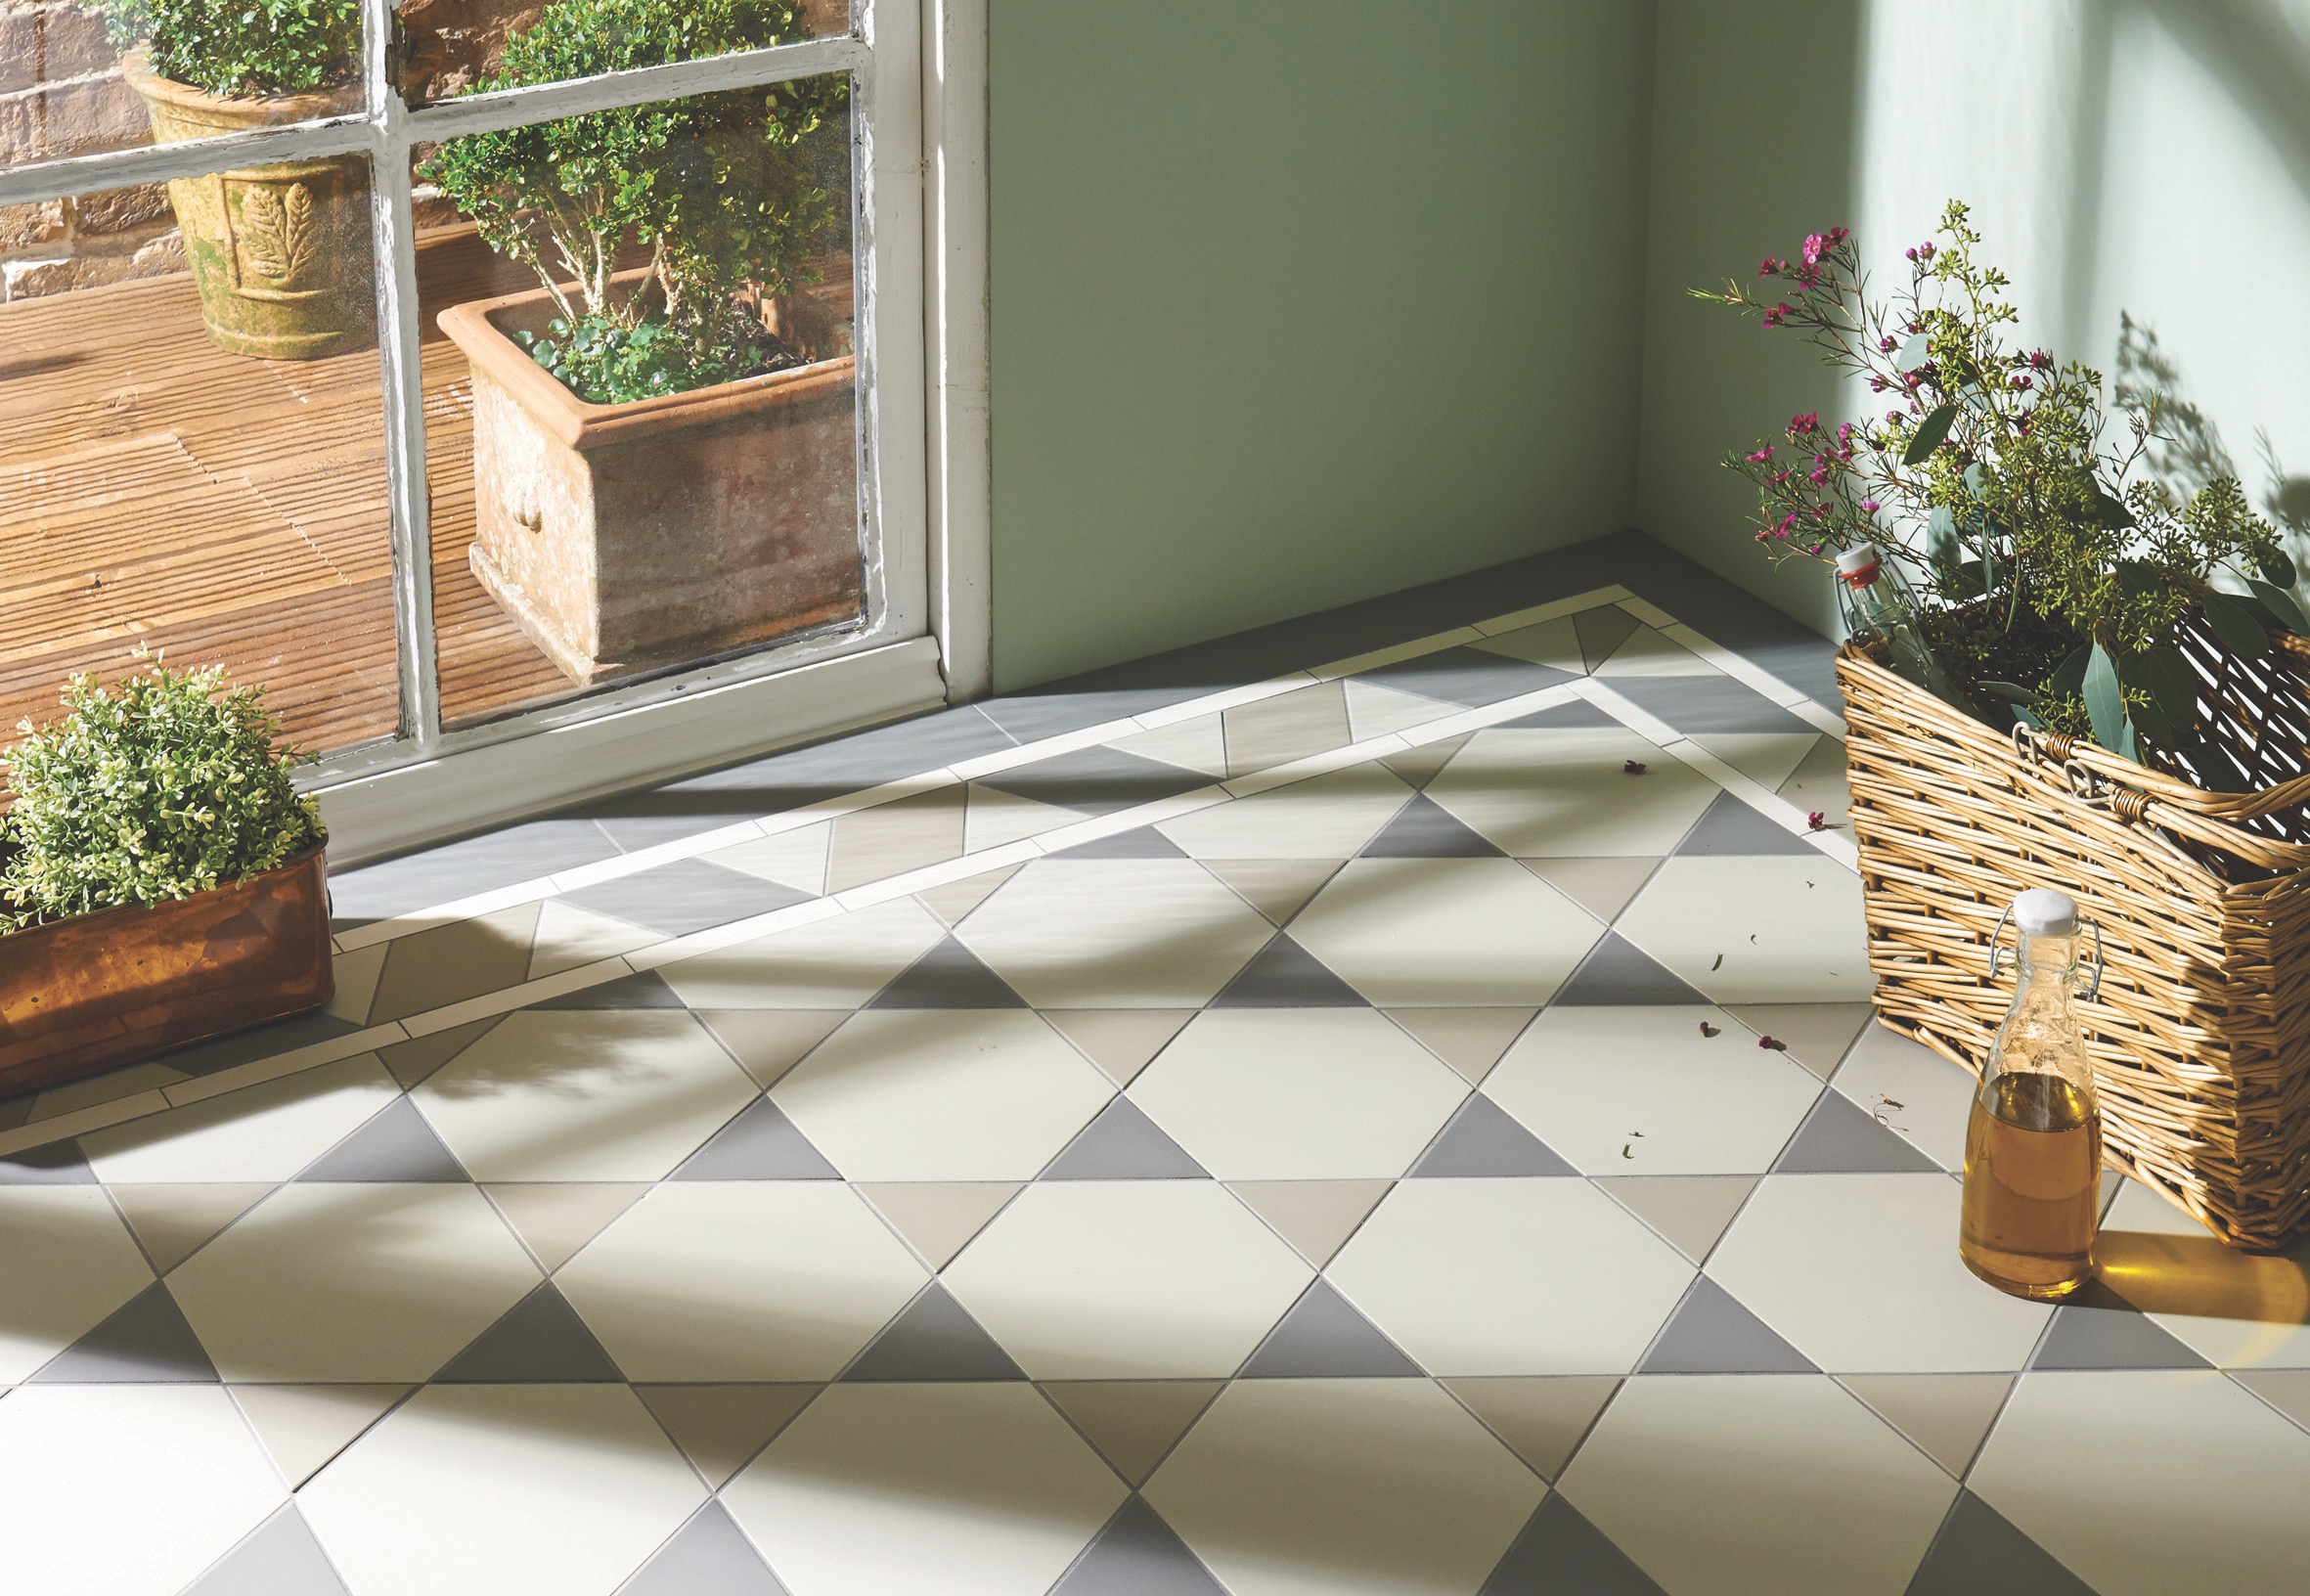 Original Style - VFT - Hexham pattern with Housman border in Chester Mews, Holkham Dune and Revival Grey.jpg